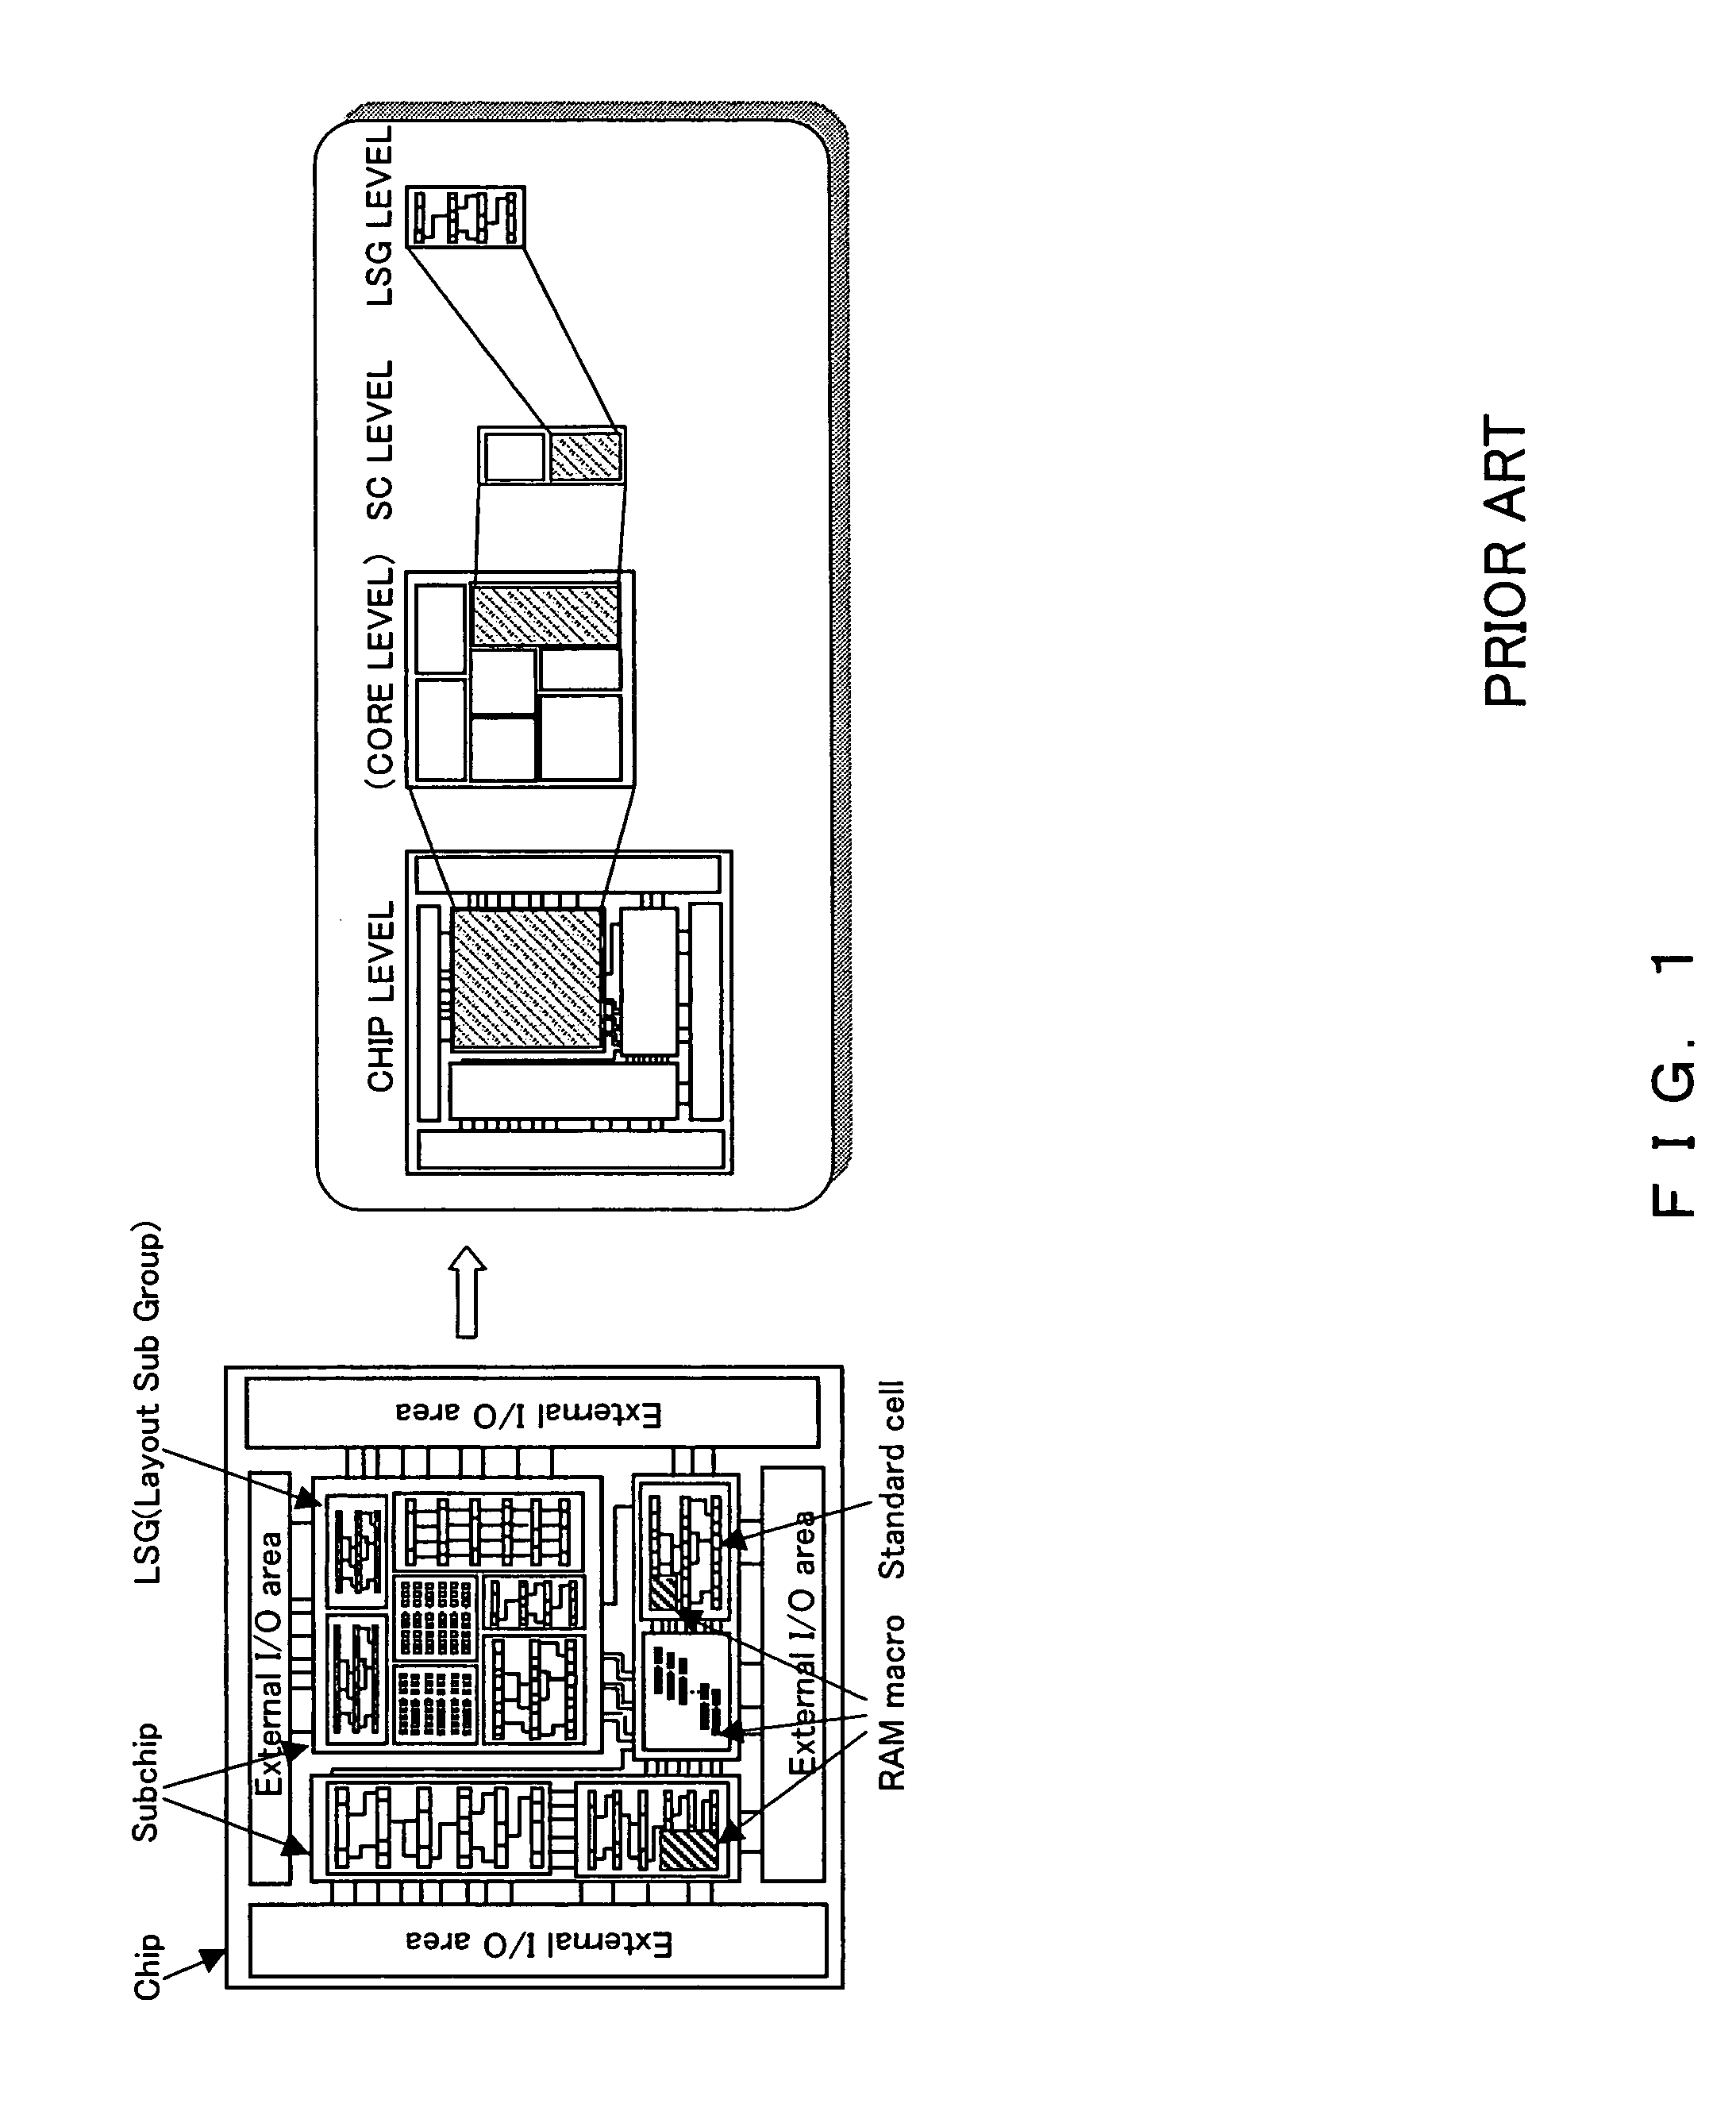 Method for the generation of static noise check data in the layout hierarchical design of an LSI